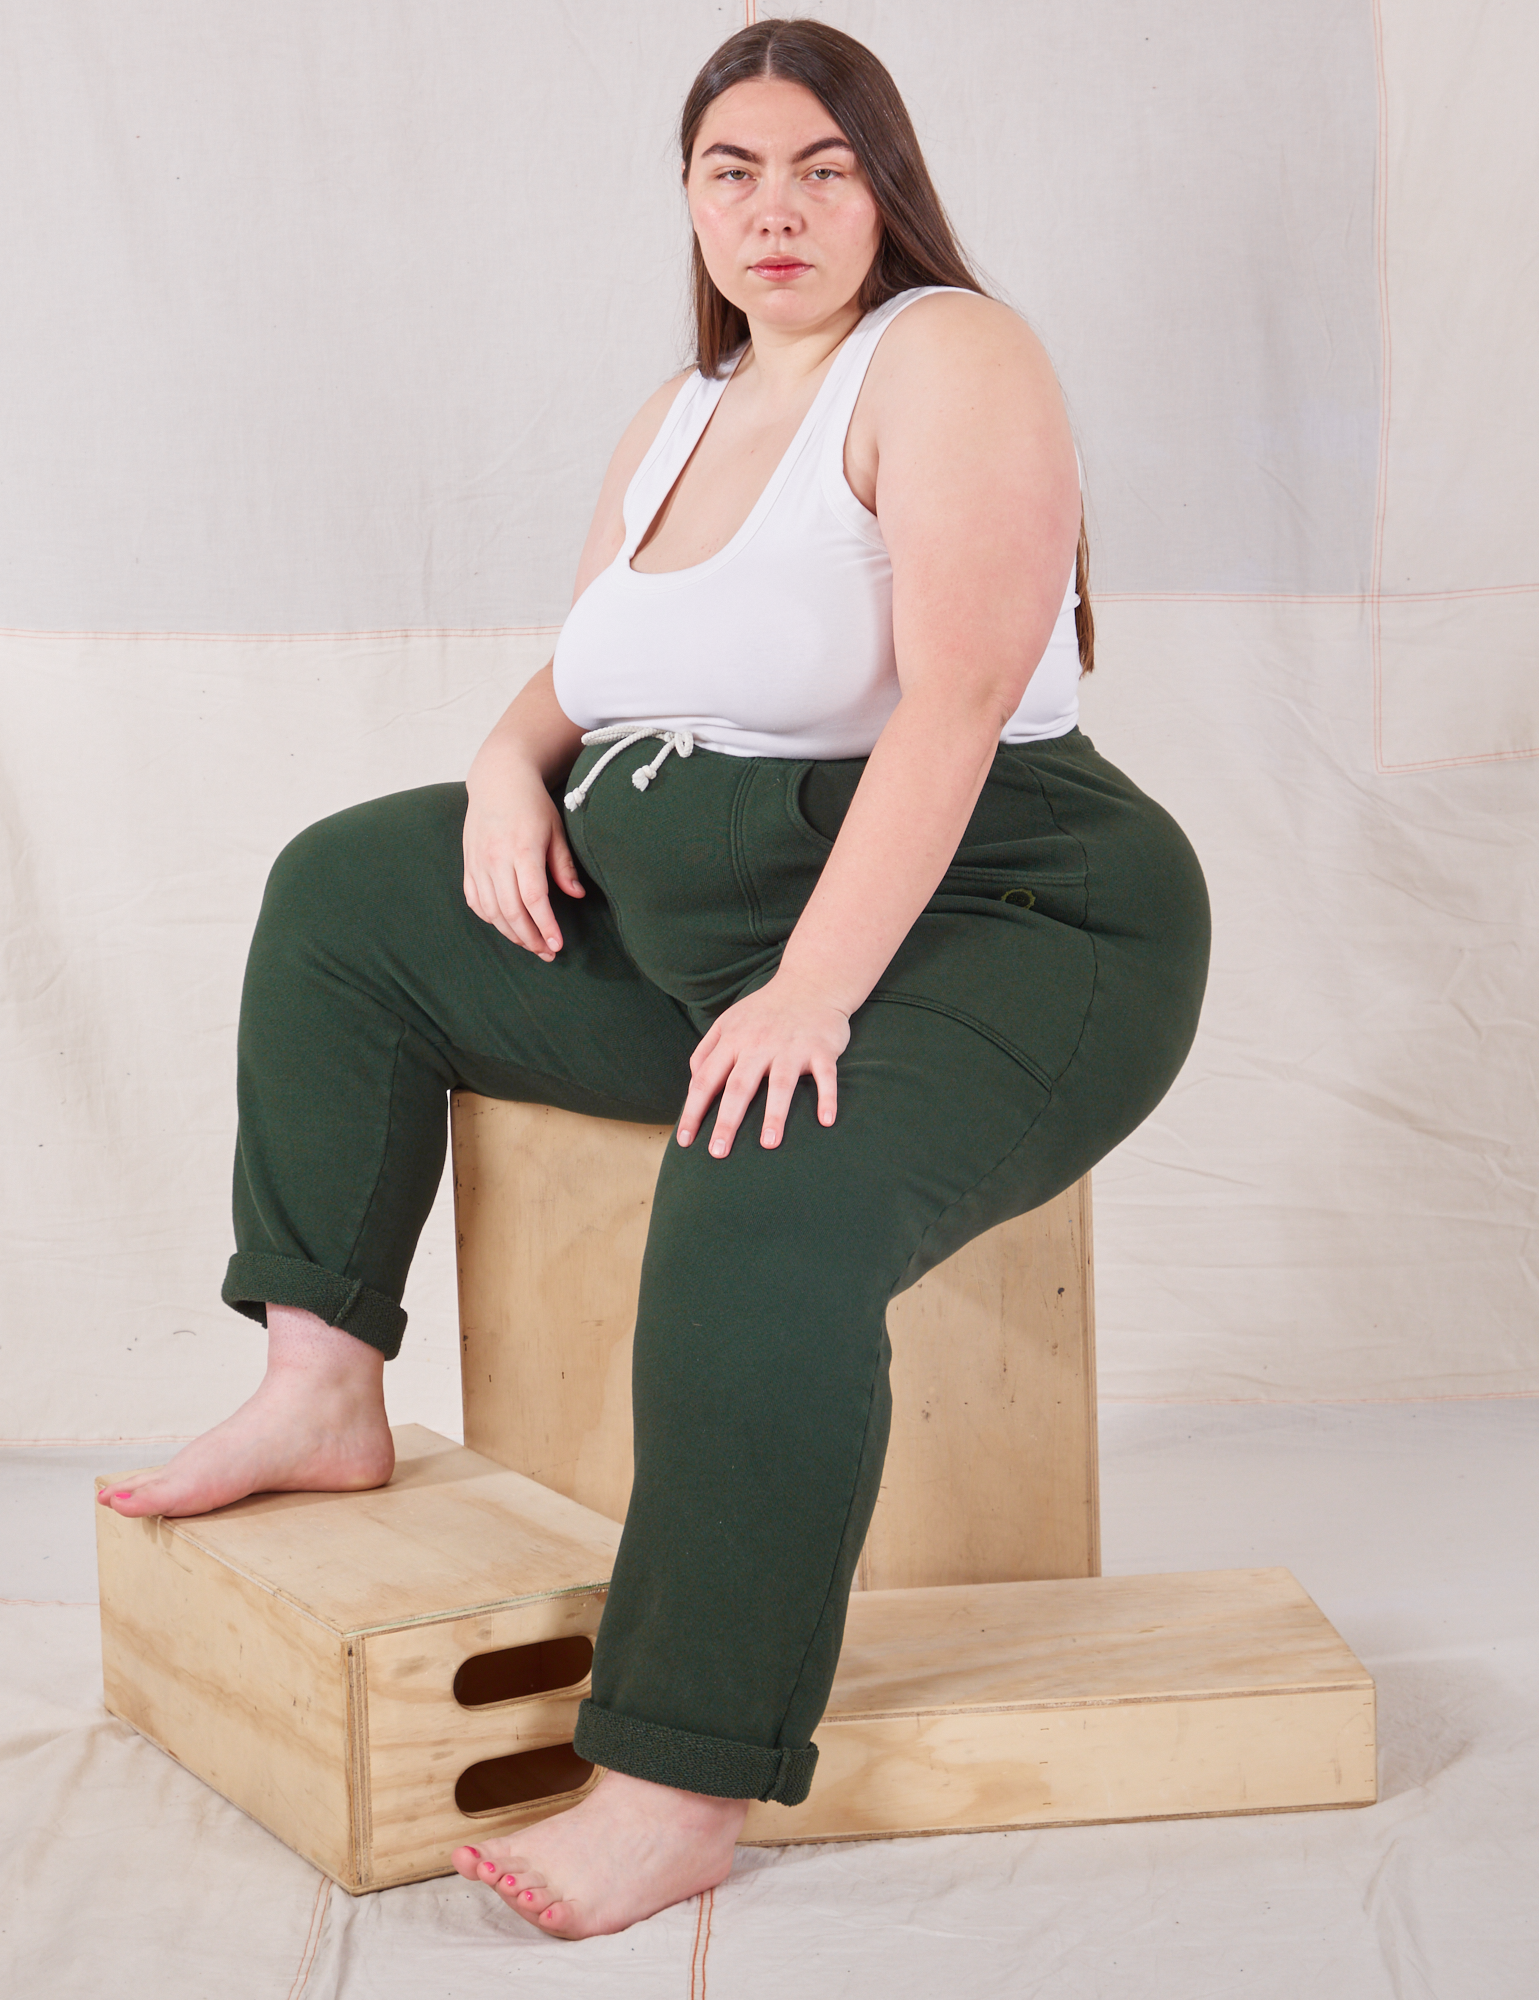 Marielena is wearing Rolled Cuff Sweat Pants in Swamp Green and Cropped Tank in vintage tee off-white